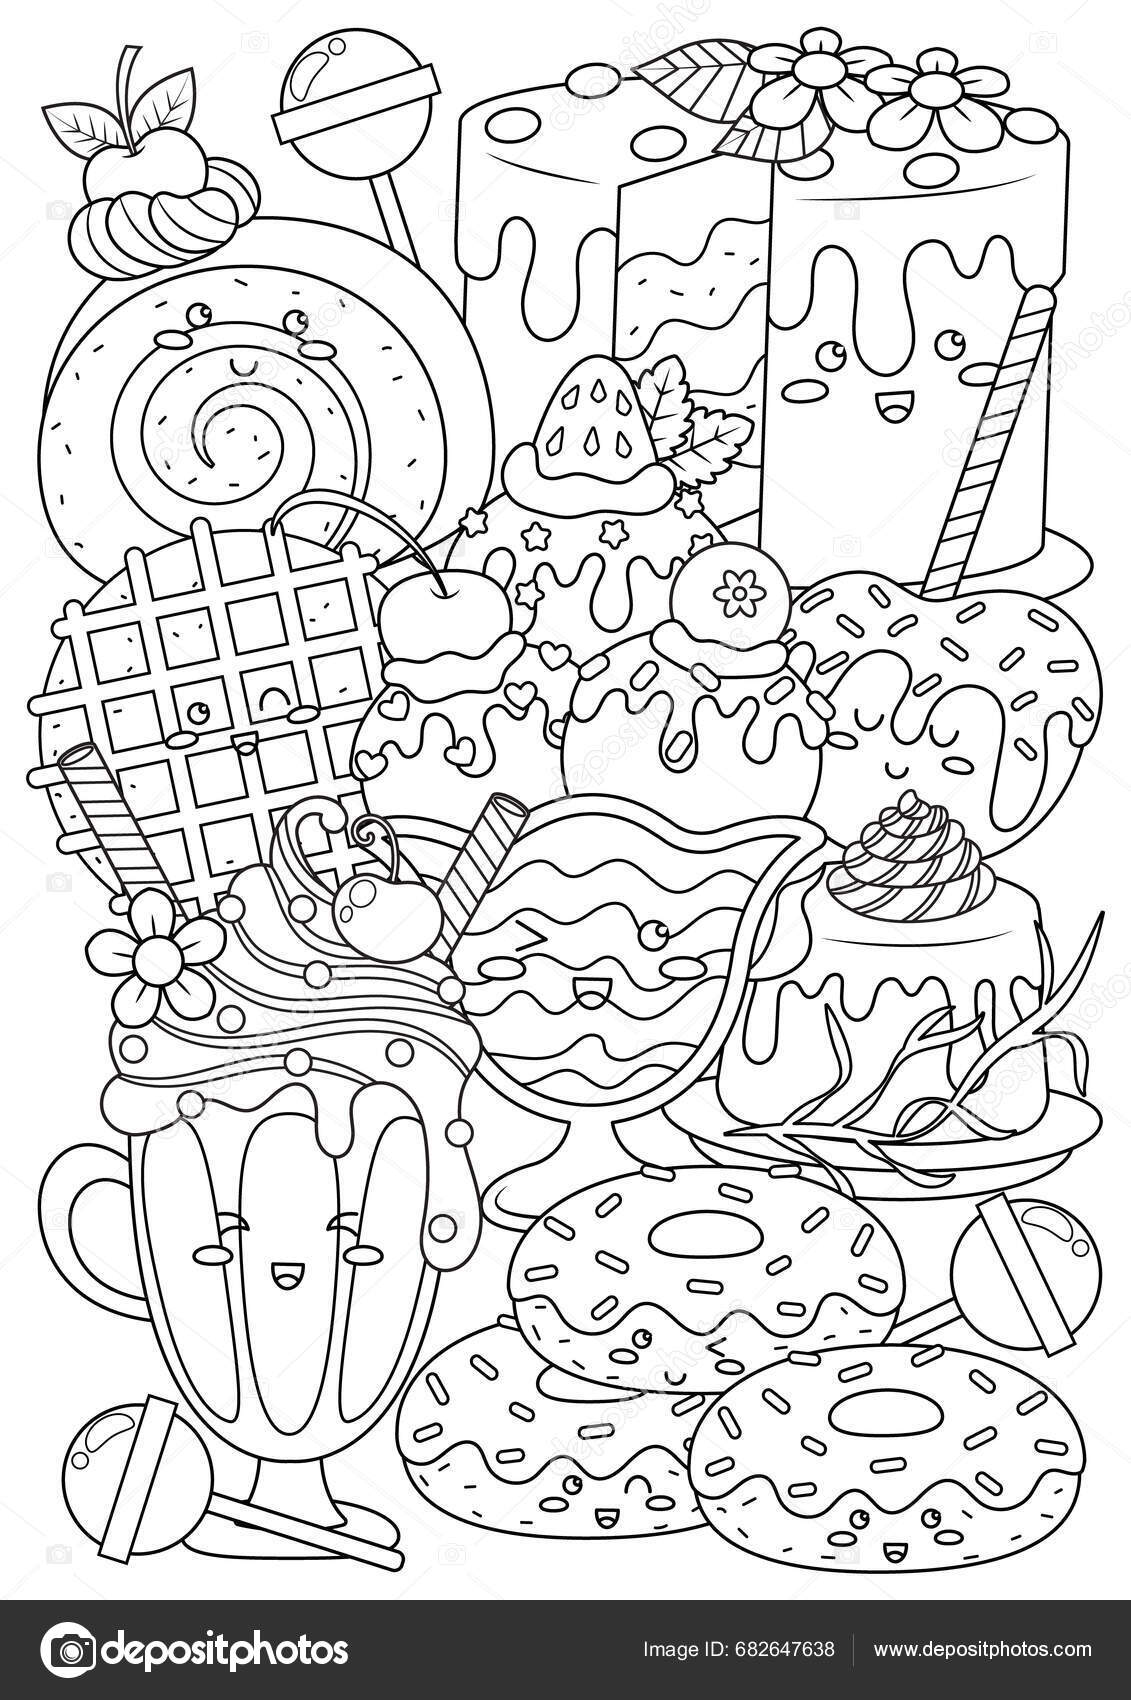 Coloring page adults teenagers coloring therapy meditation relaxation mindful stress stock vector by nutkinsj